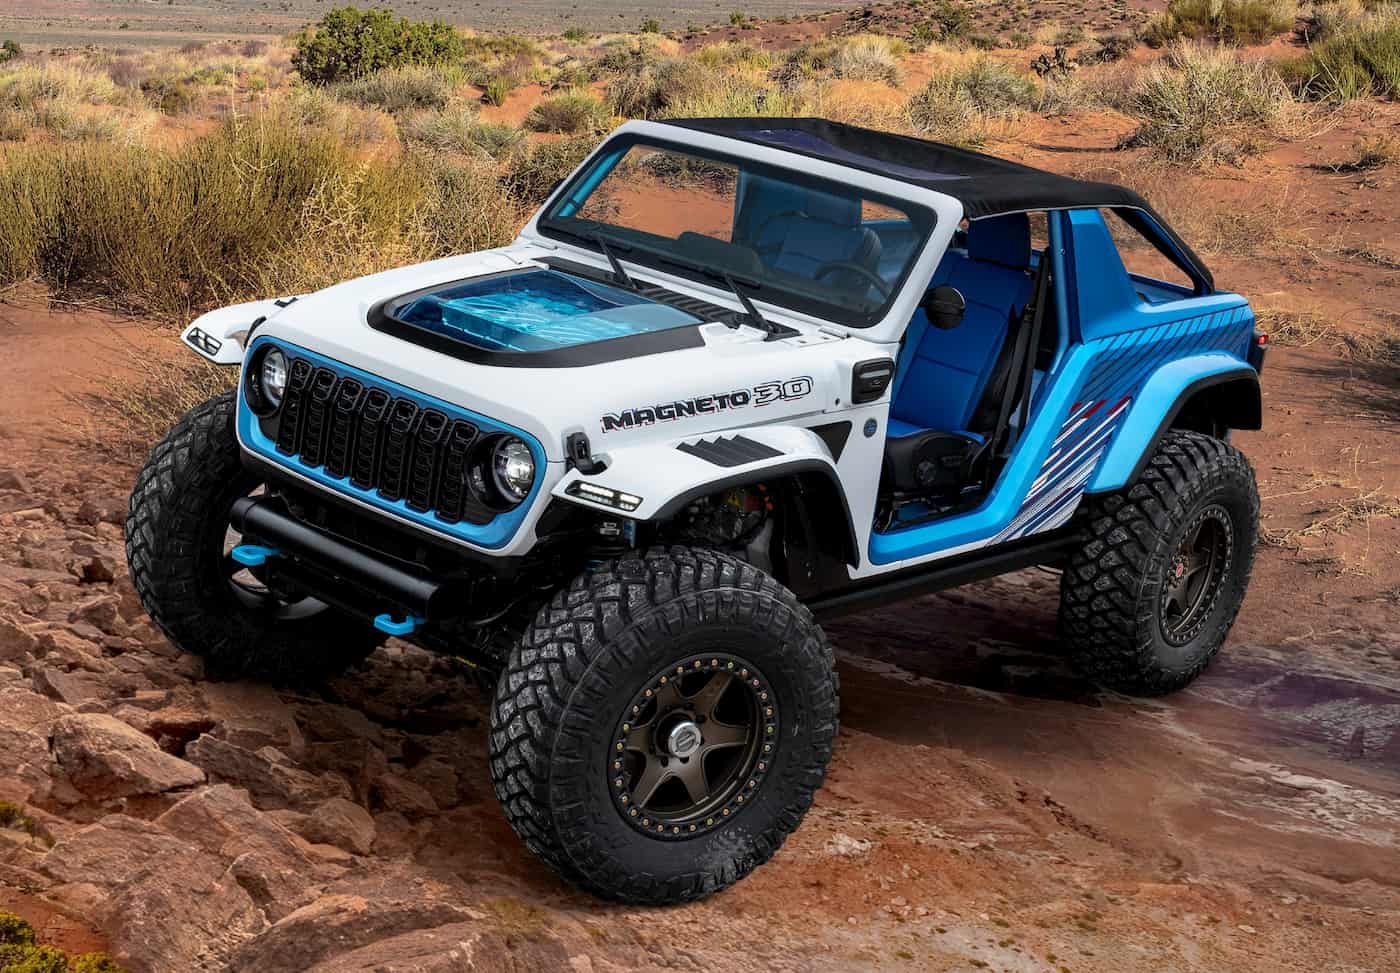 Jeep shows off beastly electric Wrangler 3.0 concept